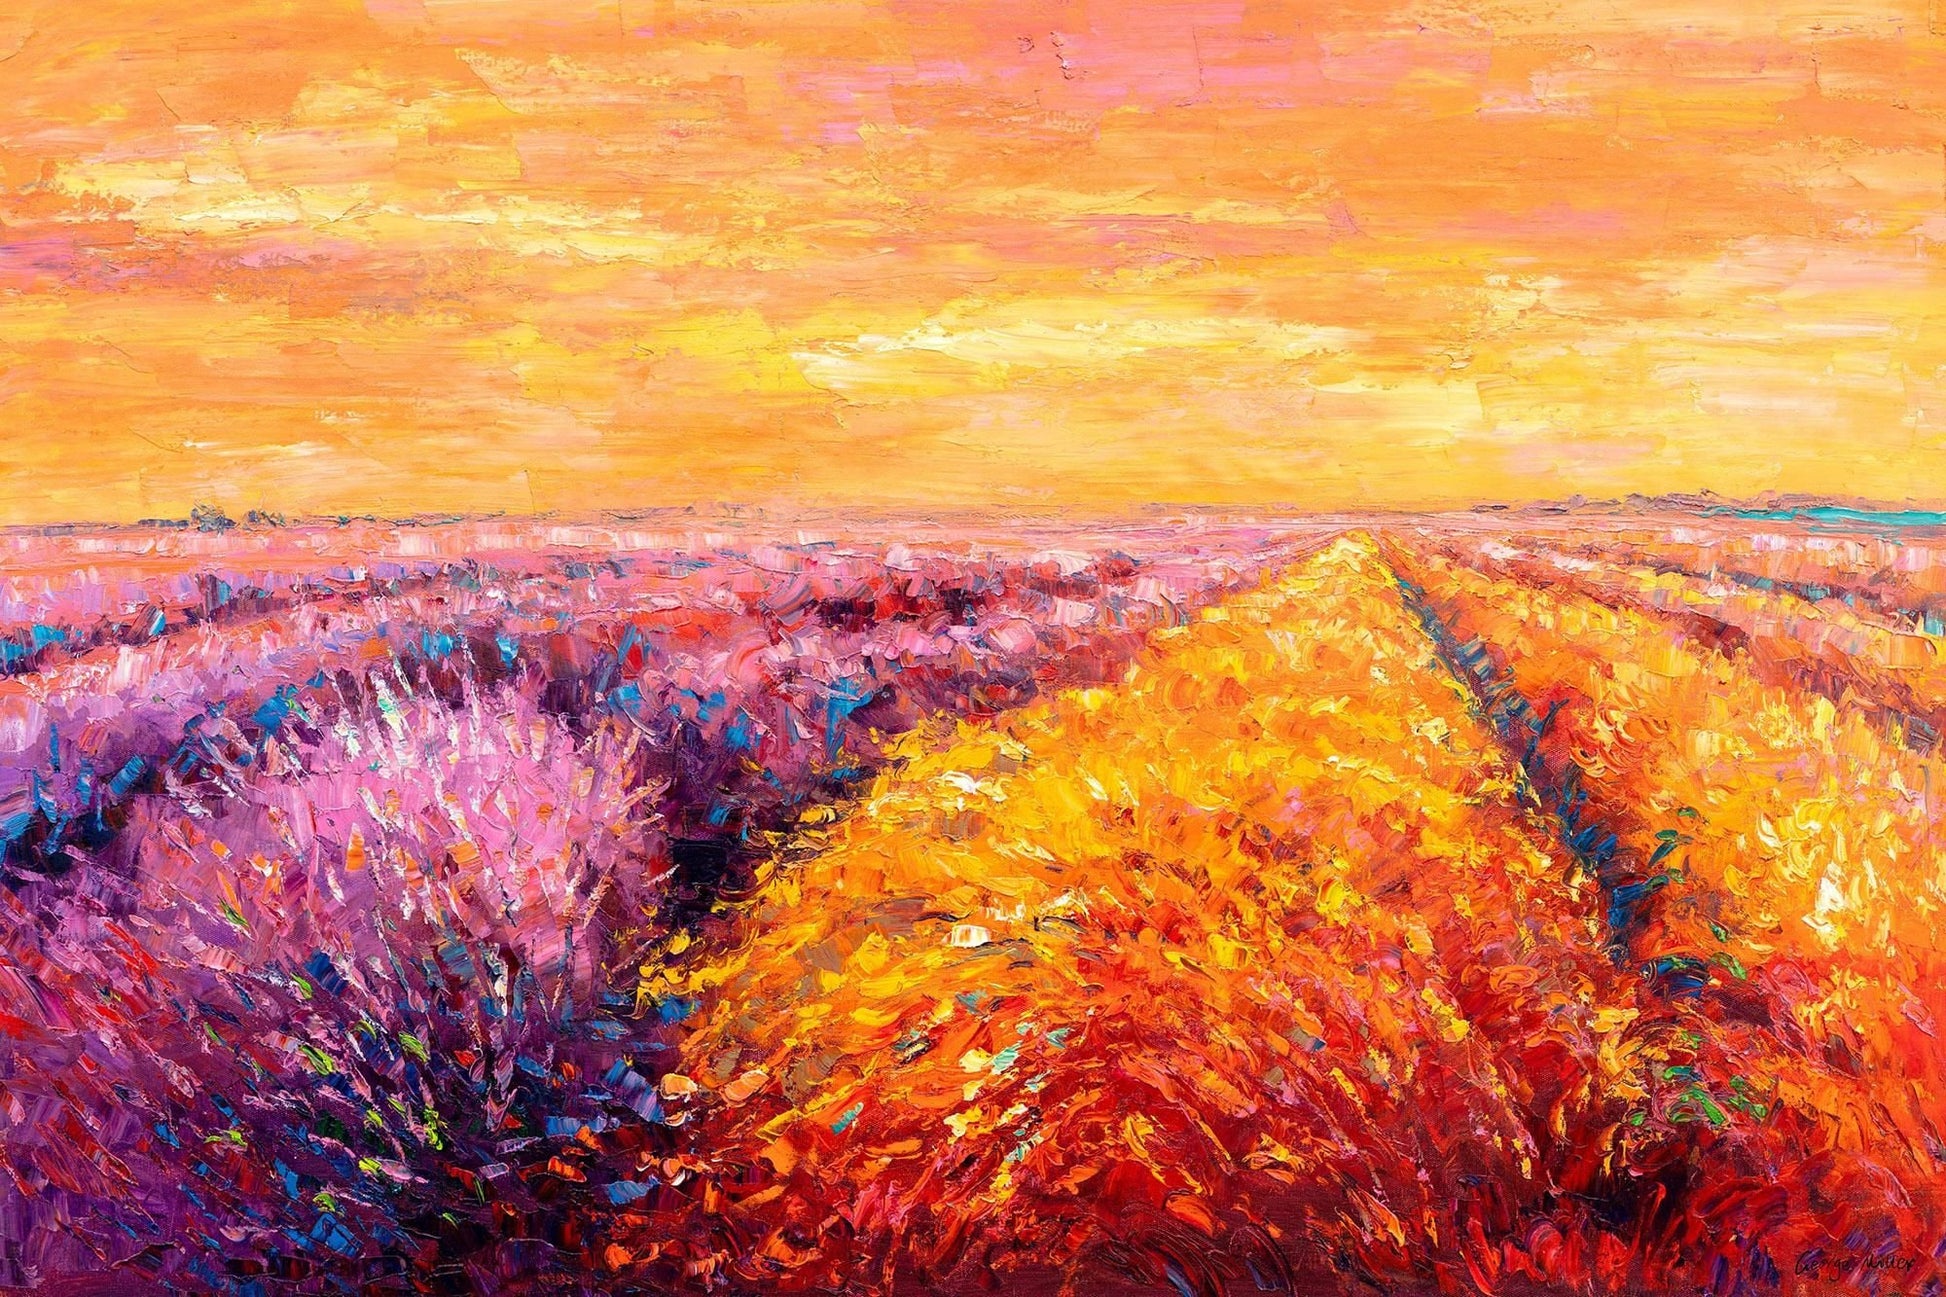 Oil Painting Landscape Provence Lavender Fields Sunrise, Oil On Canvas Painting, Large Canvas Art, Hand Painted, Modern Wall Art, Textured